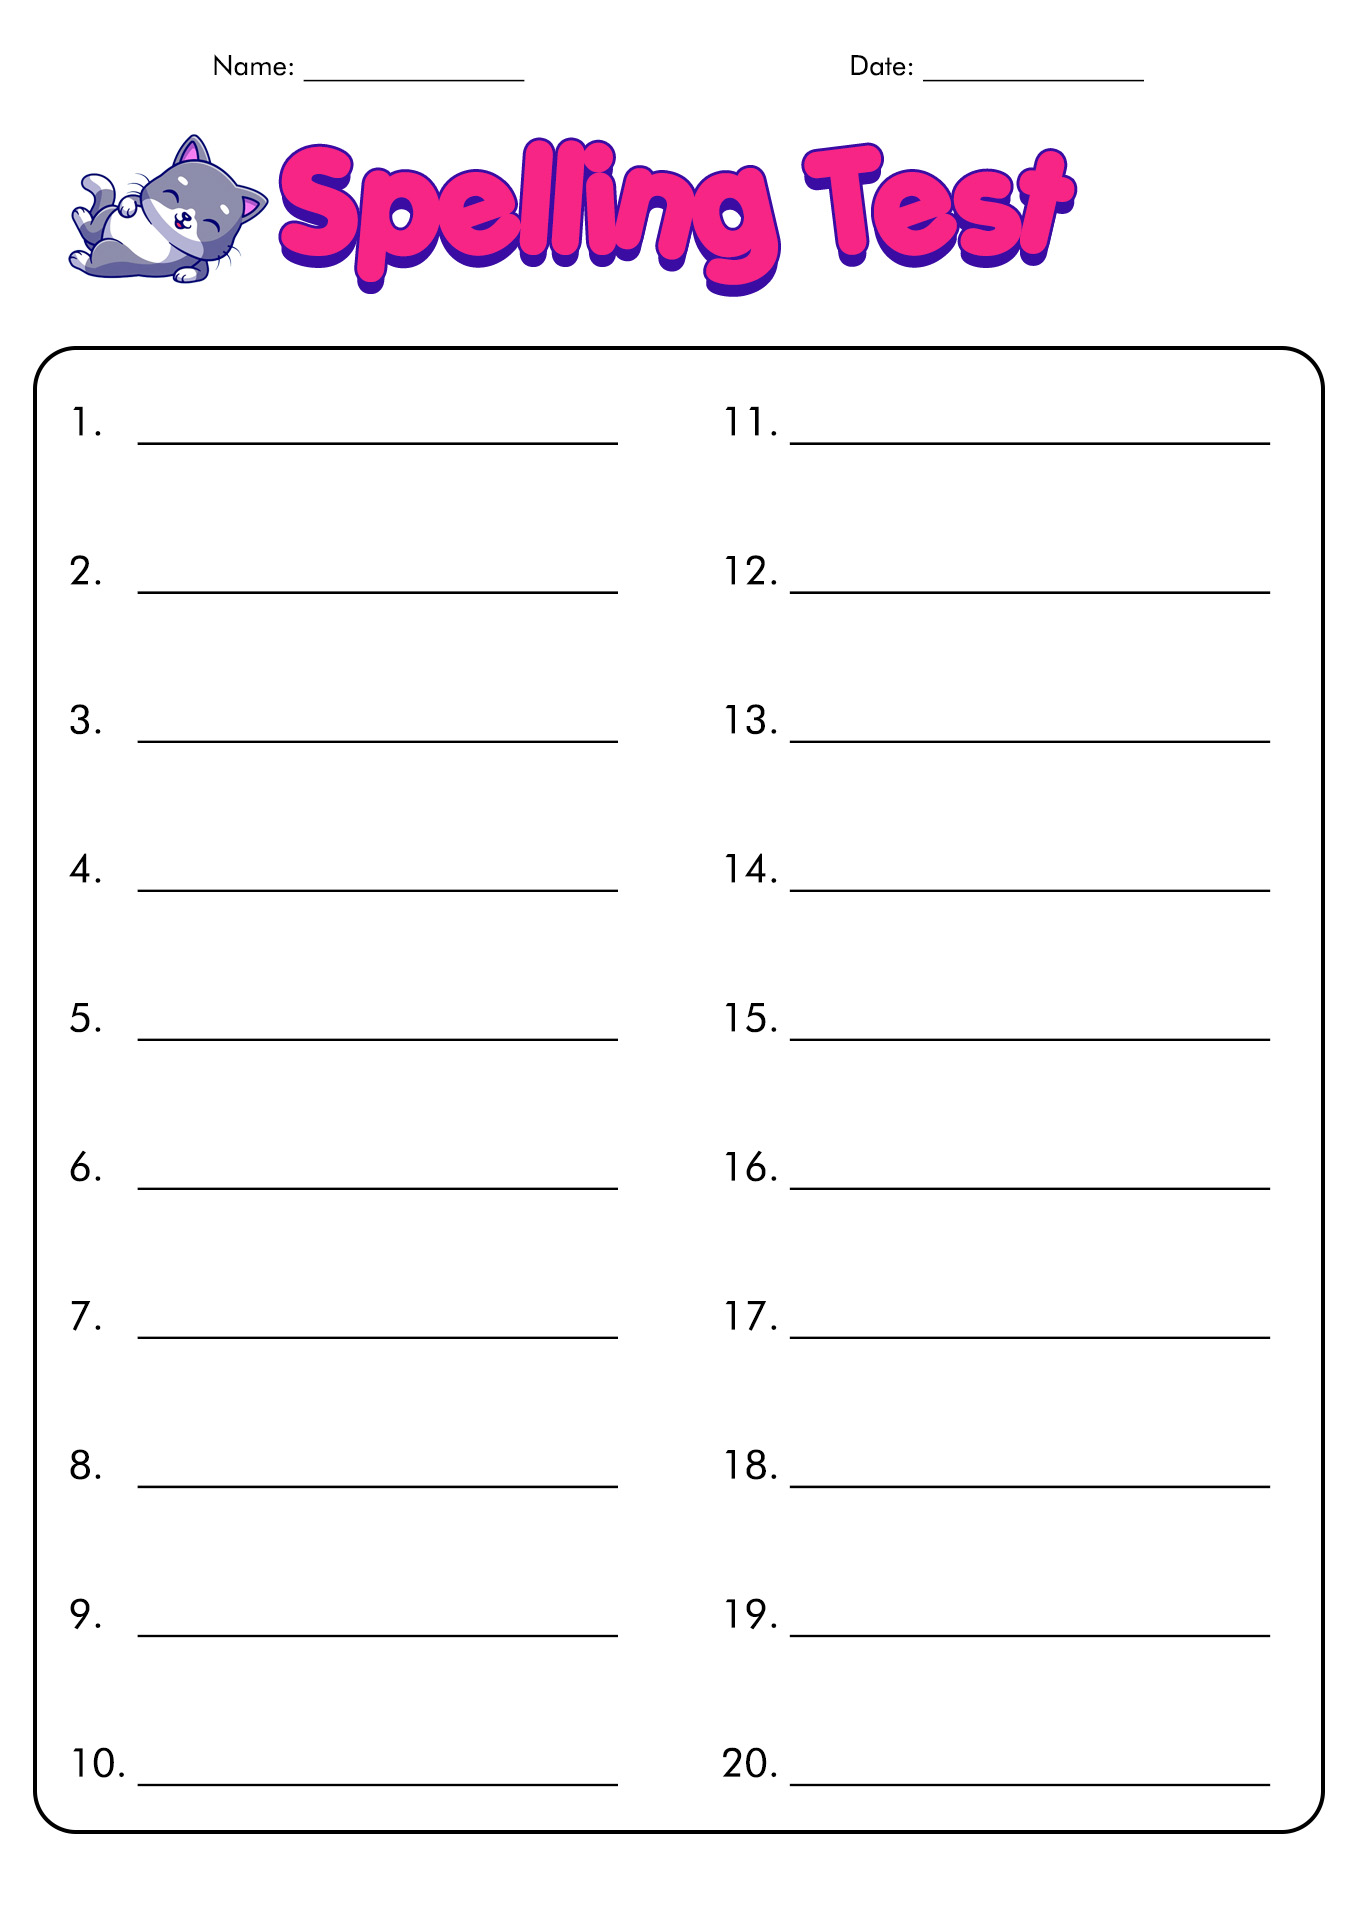 Spelling Test Paper Template